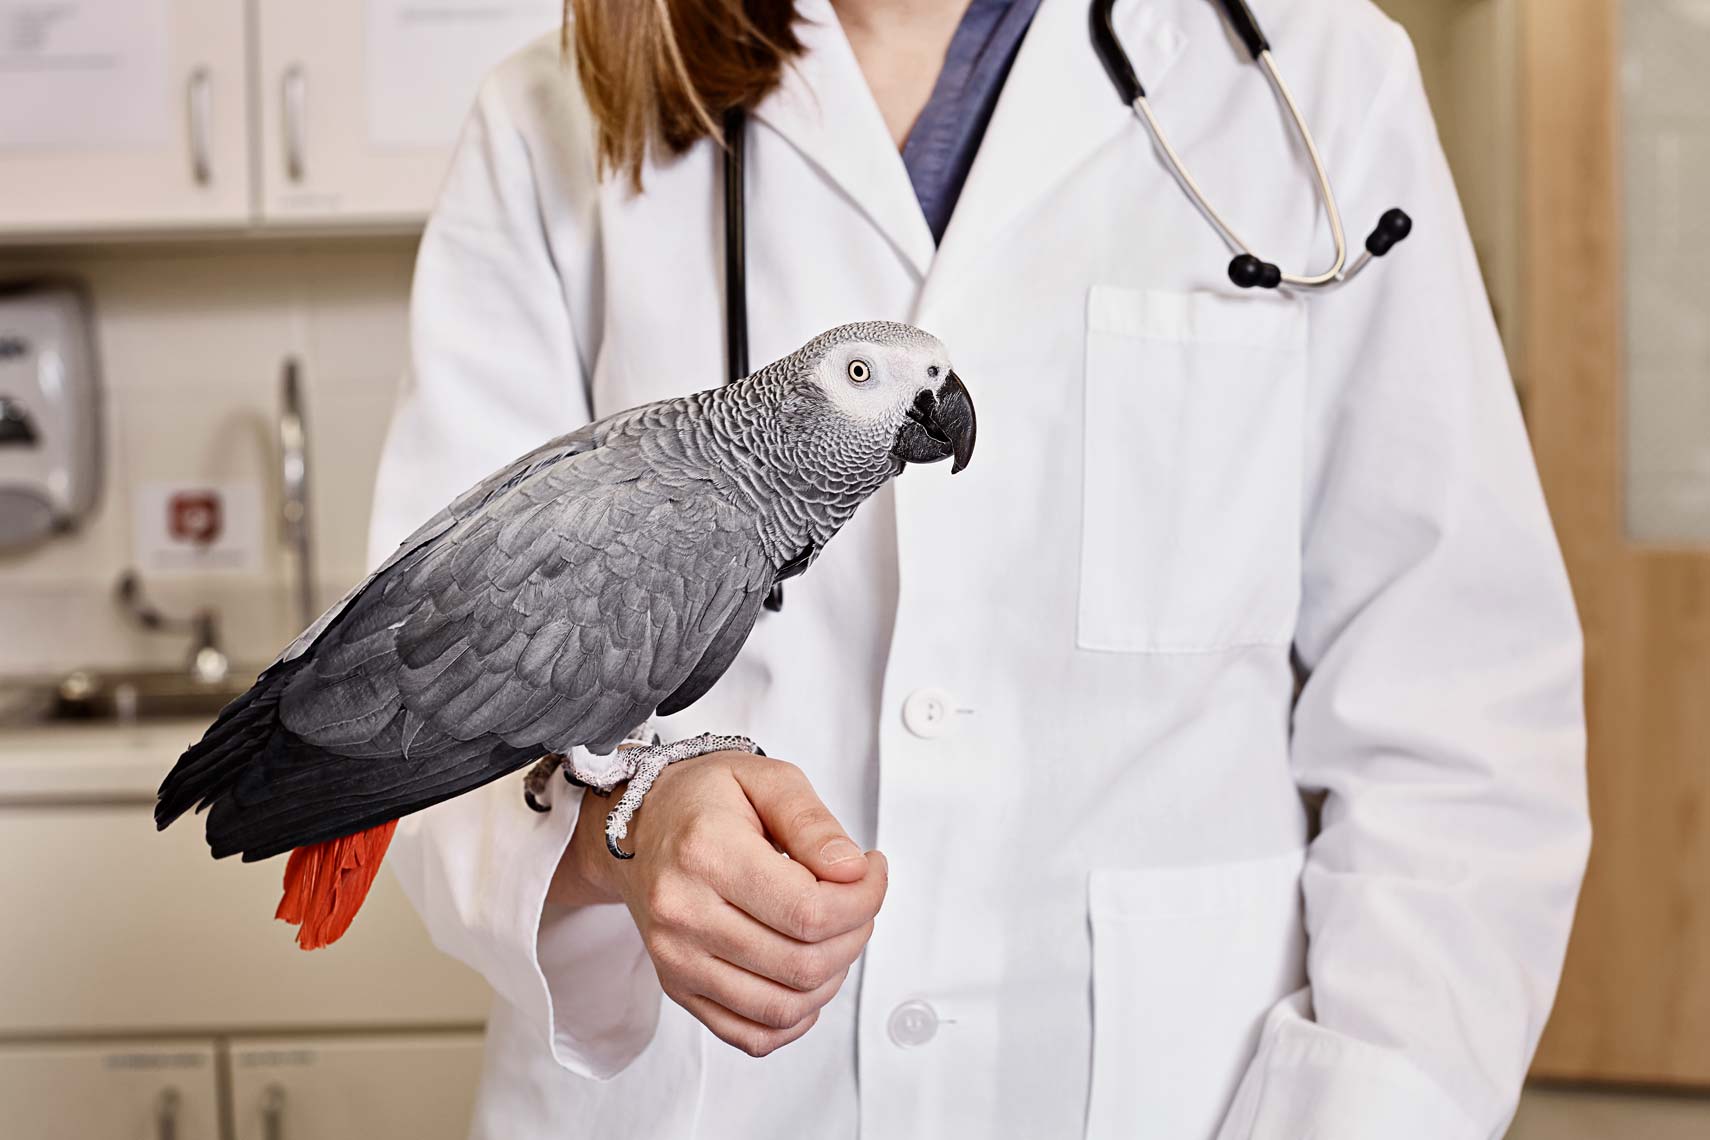 Photograph of veterinary student holding parrot in clinic